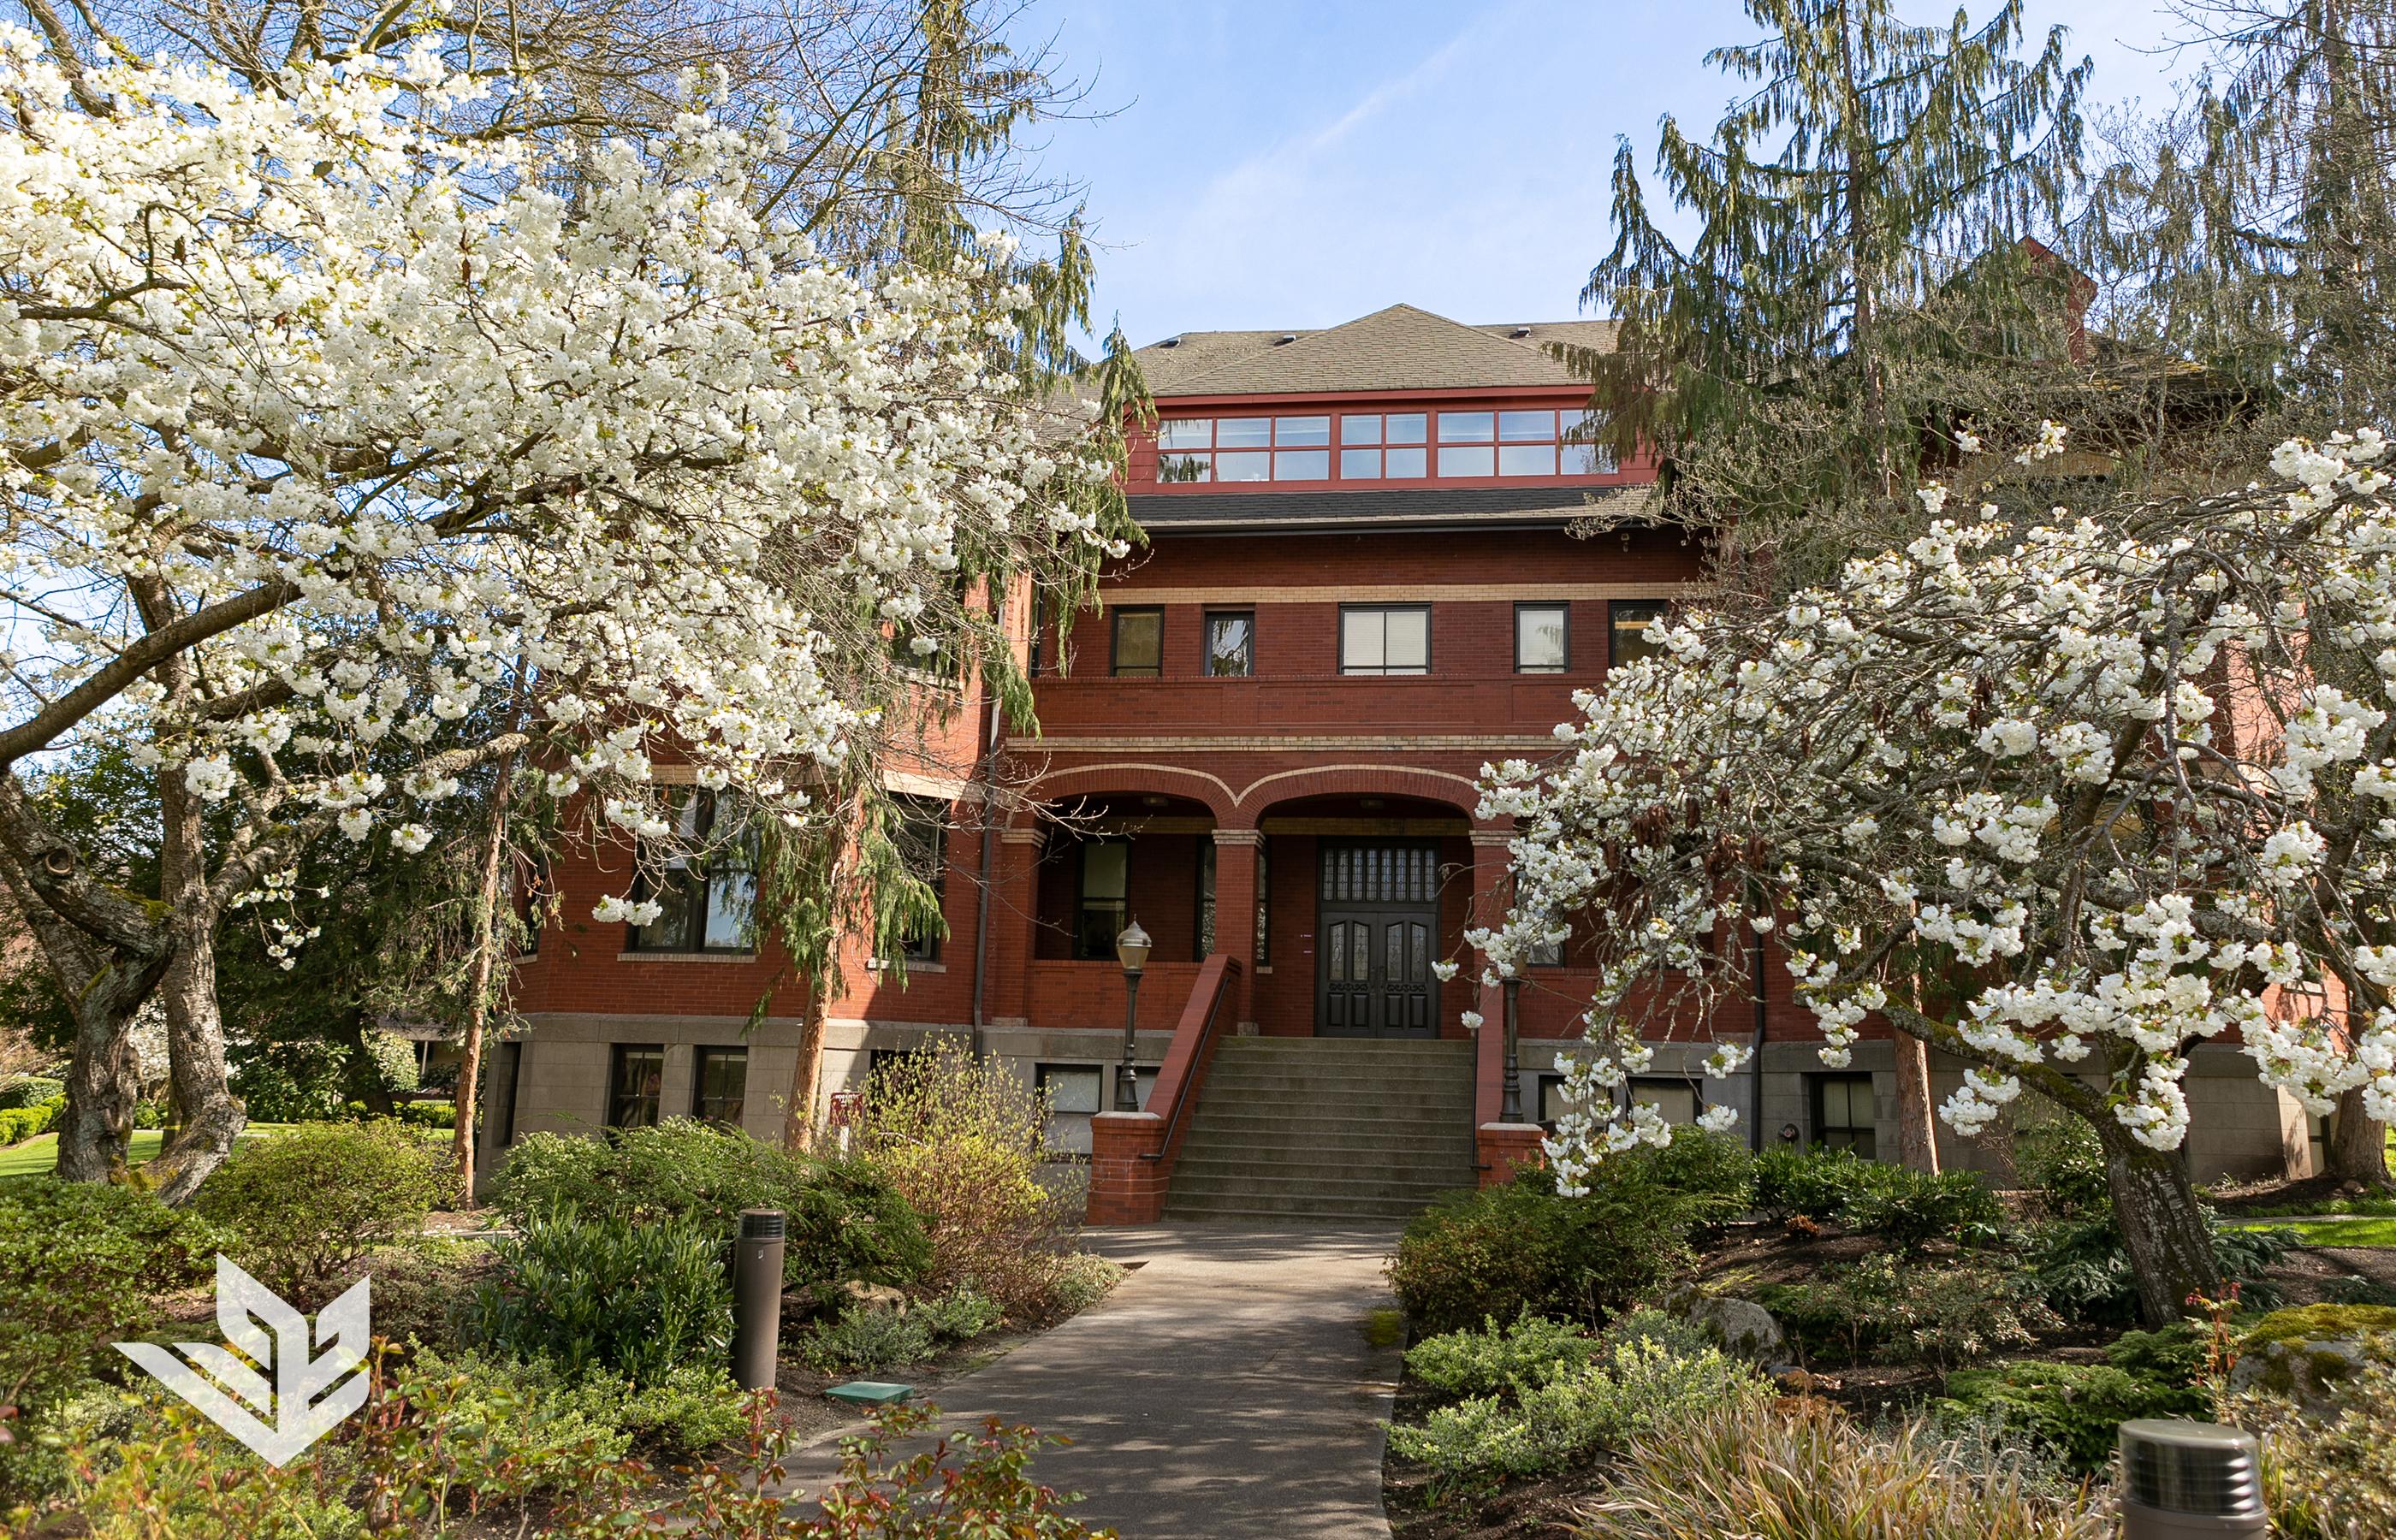 A springtime image of Peterson Hall on the Seattle Pacific University campus